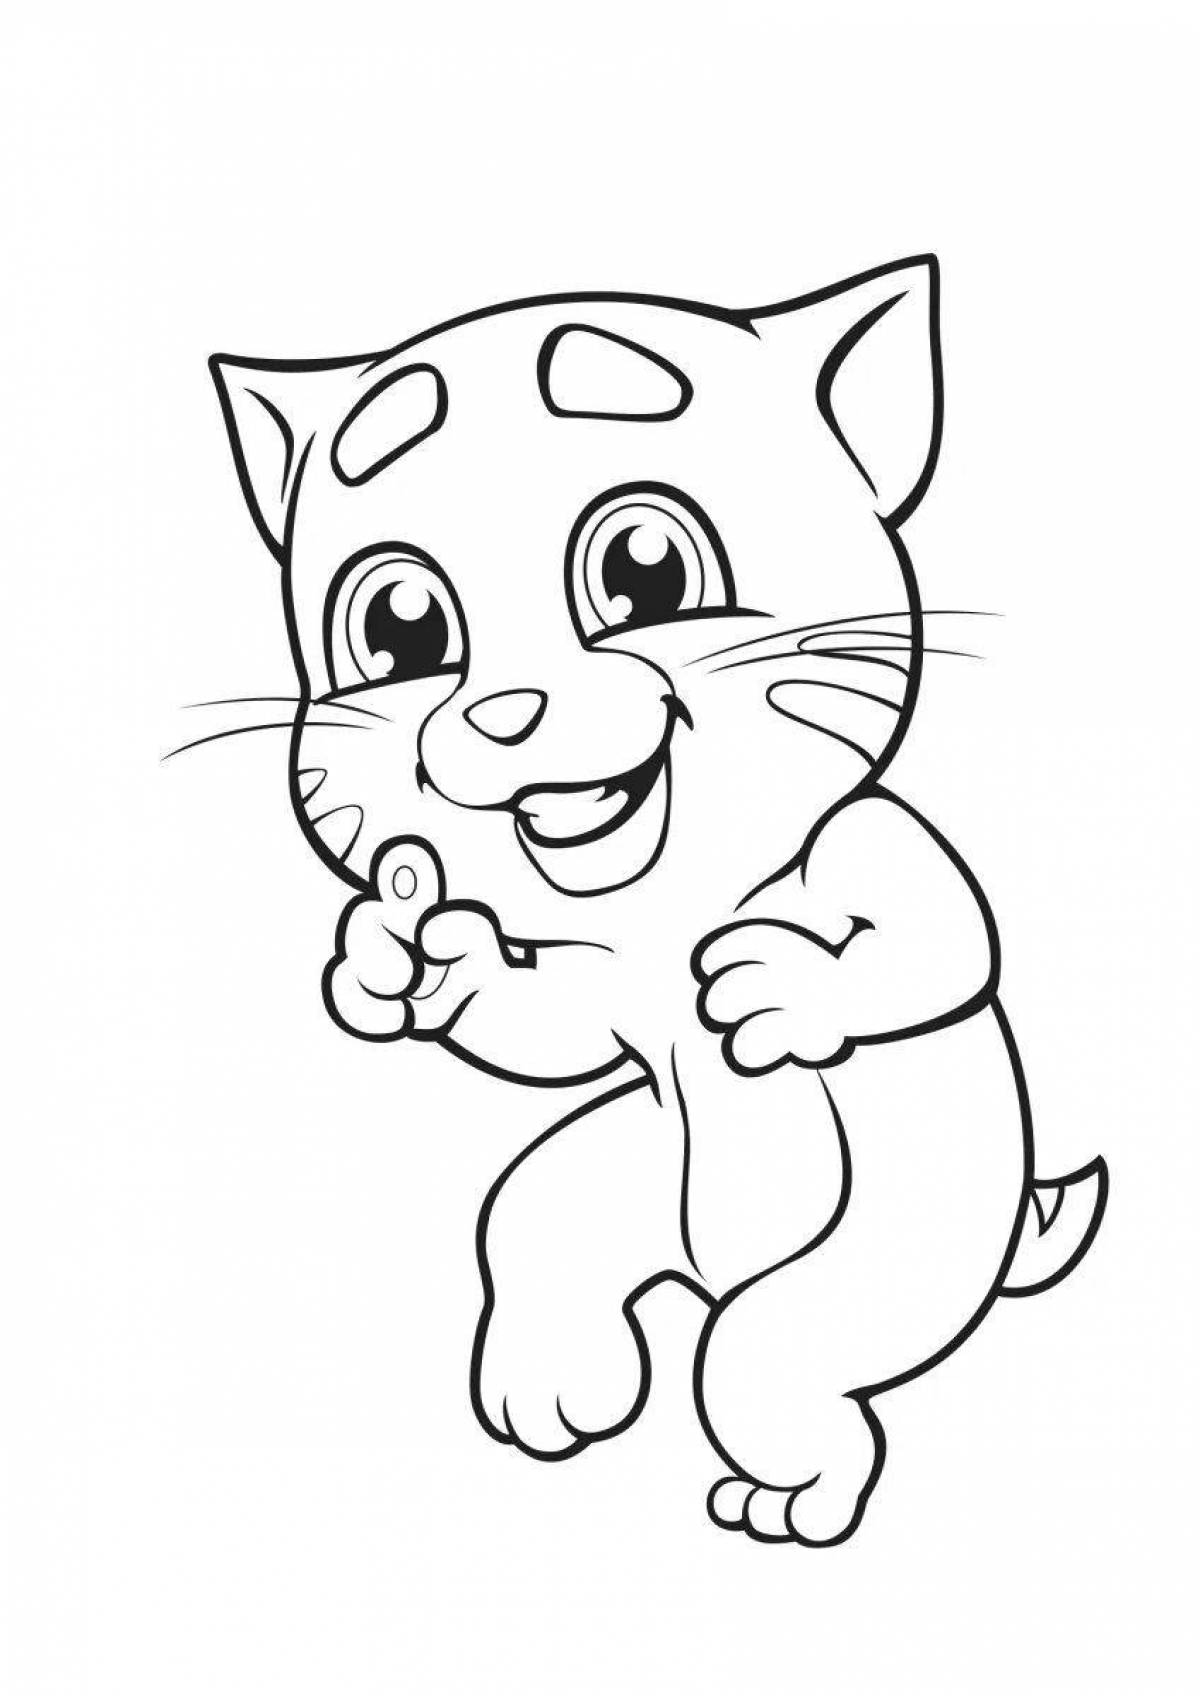 Colorful ginger coloring page